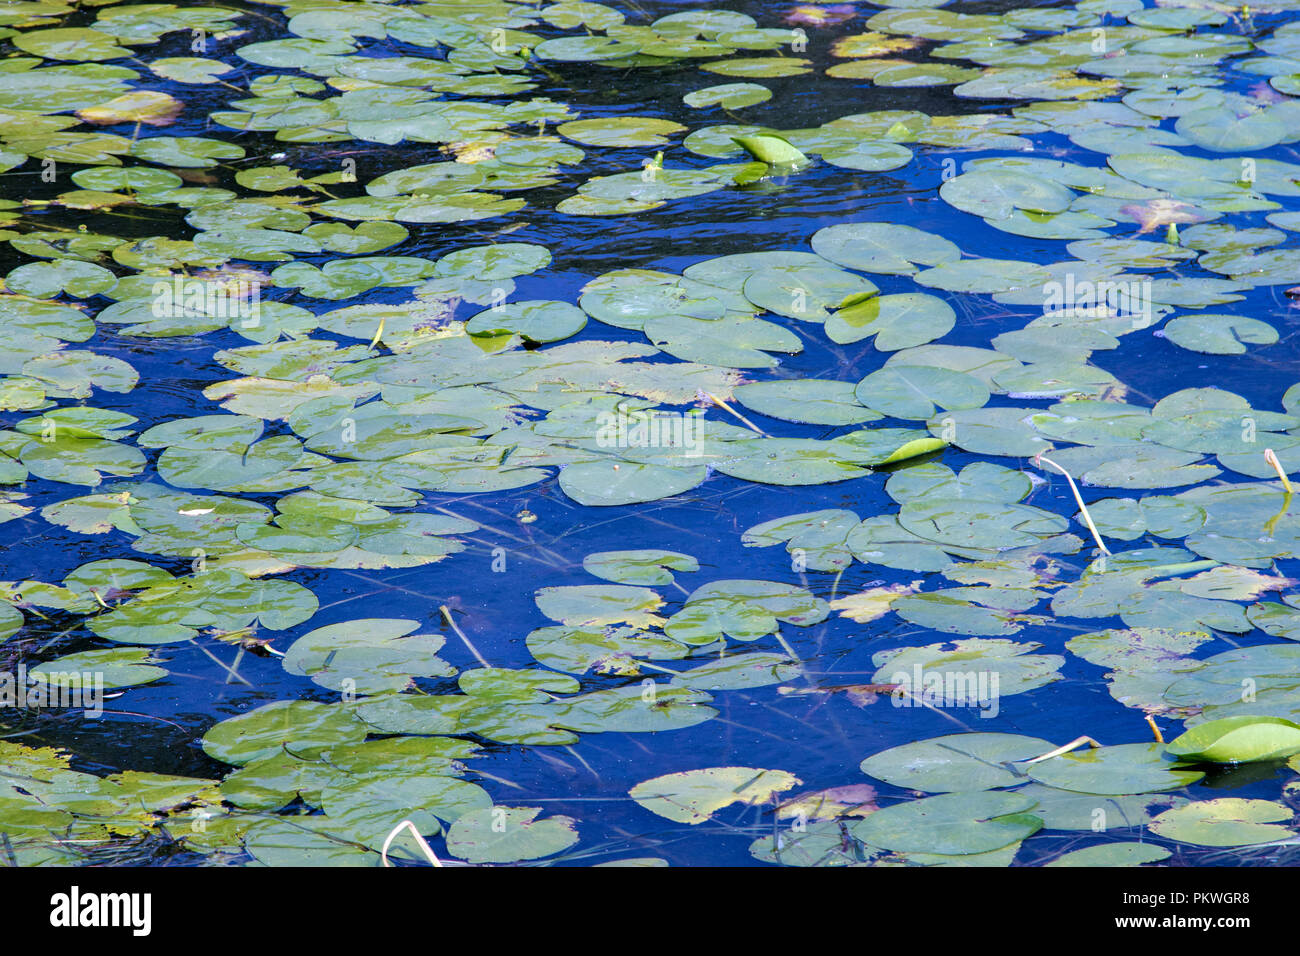 image background of green leaves of water lilies on water Stock Photo